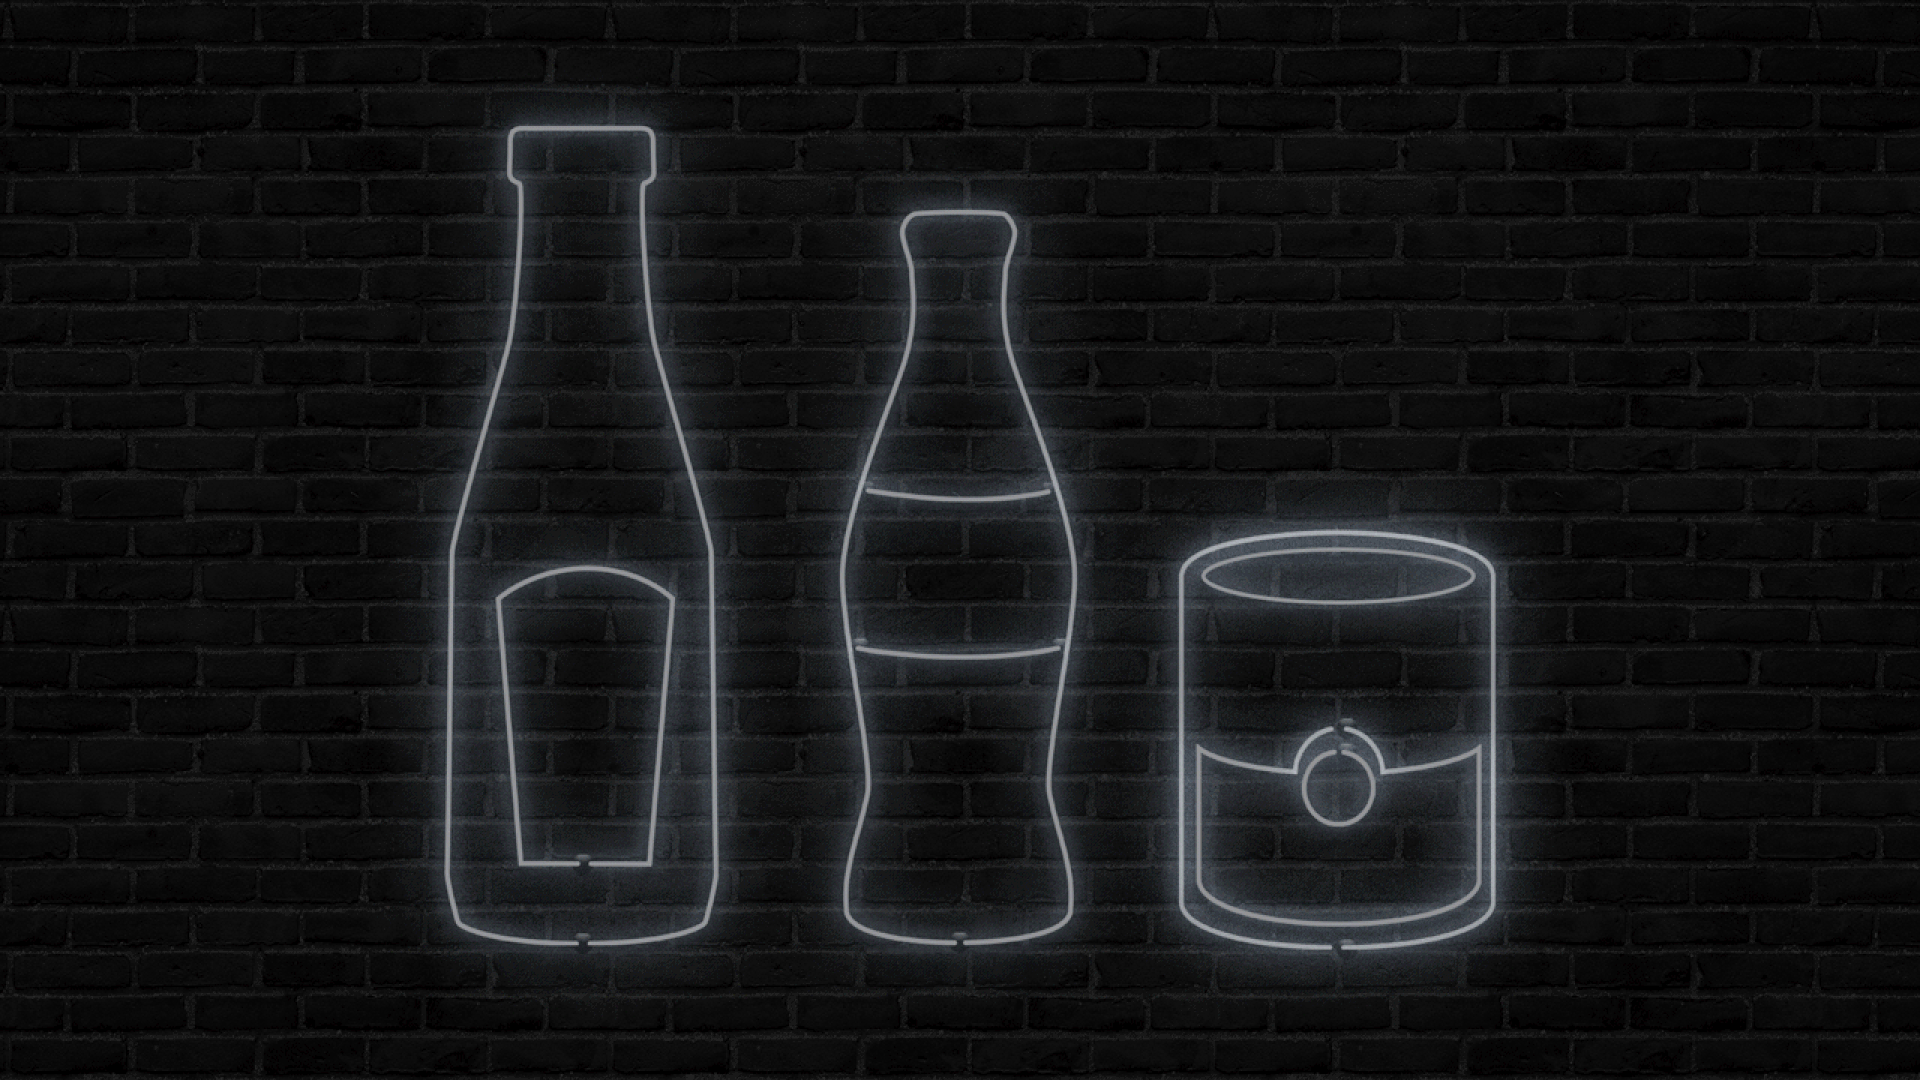 Animated illustration of a neon sign with a Heinz bottle, Coca-cola bottle, and Campbell's soup can turning generic.